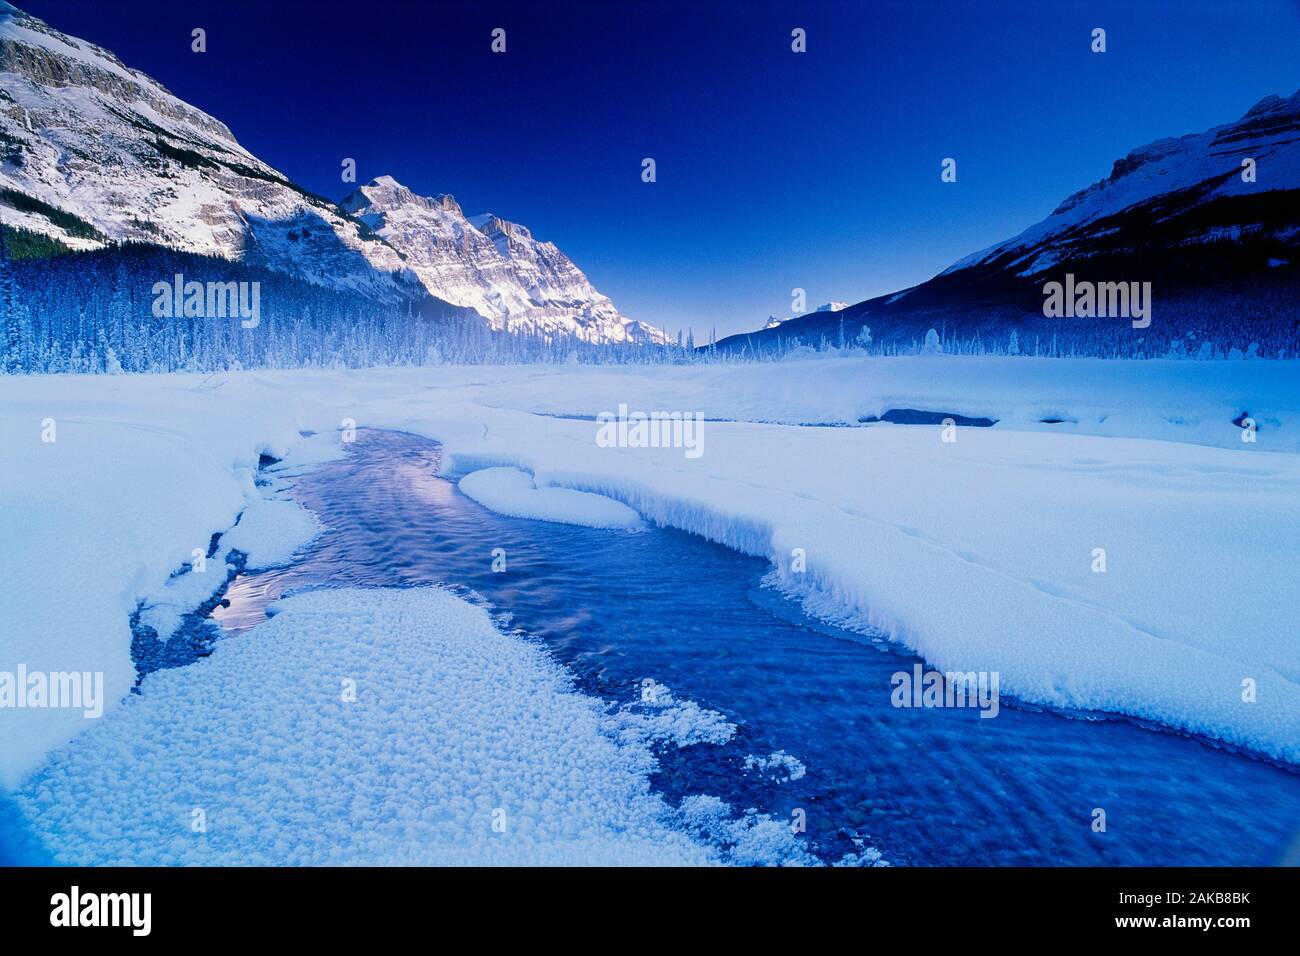 Frozen lake covered in snow in winter, Banff National Park, Alberta, Canada Stock Photo